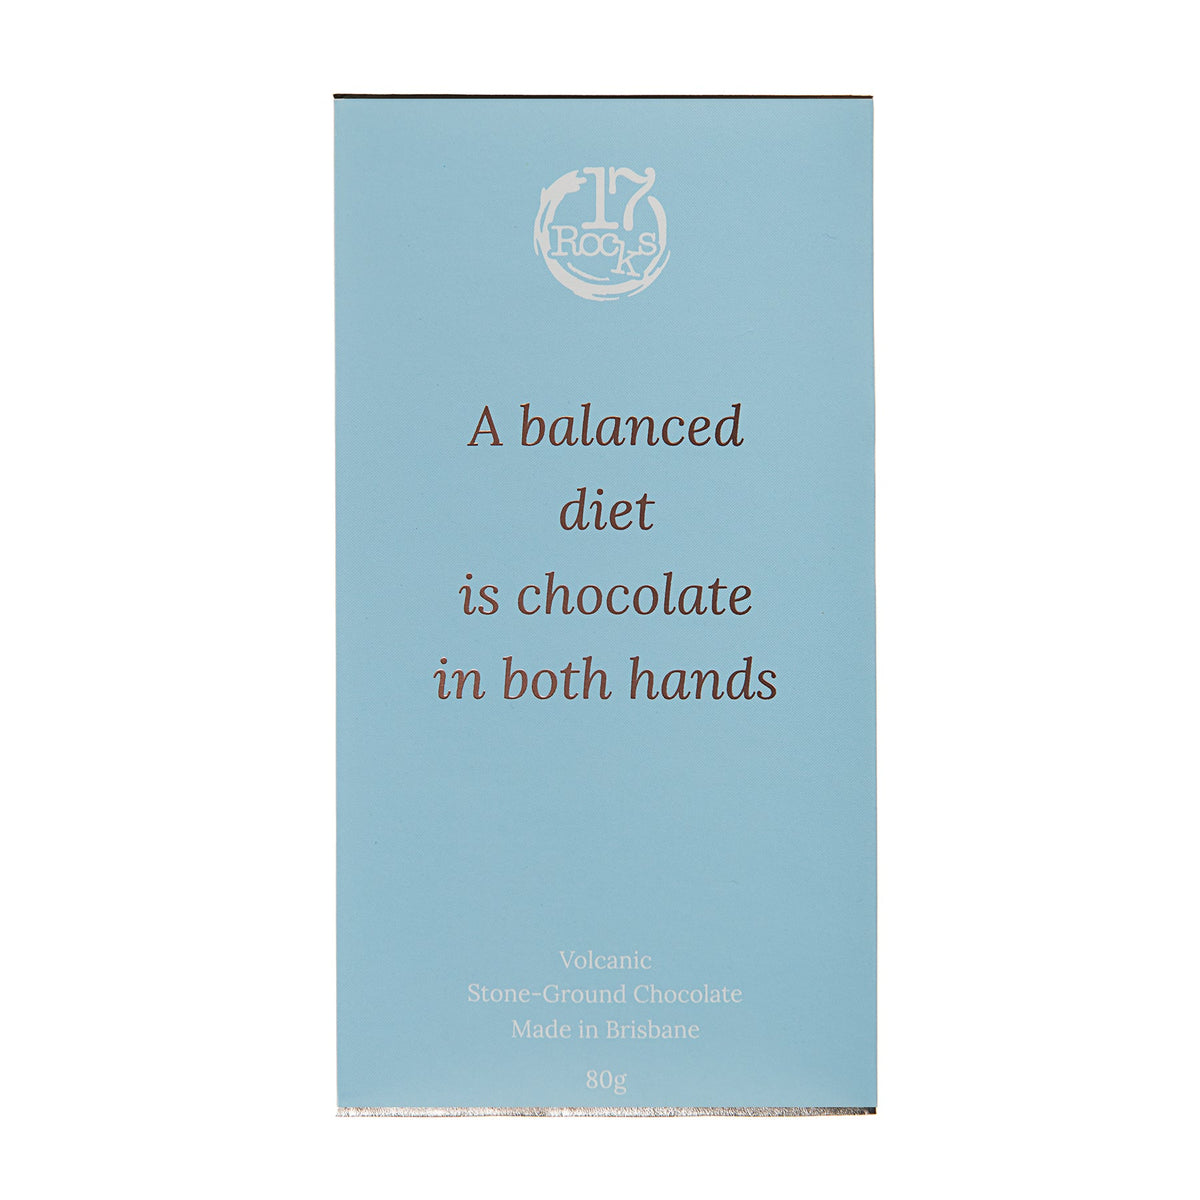 A Balanced Diet is Chocolate in Both Hands!